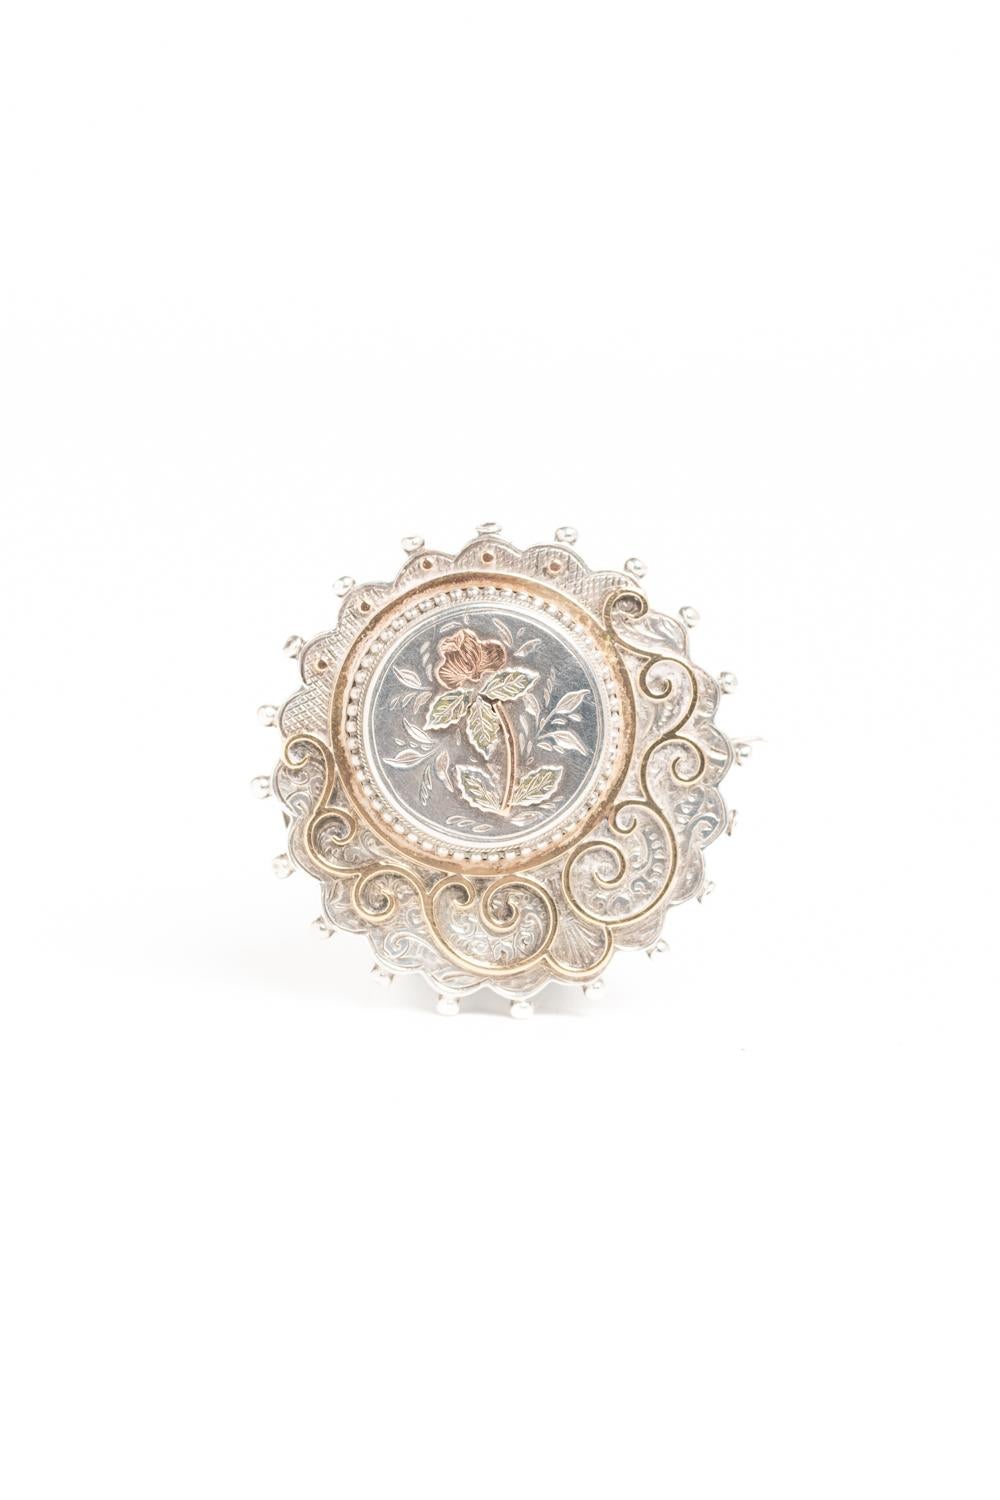 A beautiful Victorian silver brooch made circa 1880. It's typical of the late Victorian style with engraved stylized floral and geometric motifs around the edge with bobbles then a stunning circular band of gold around the brooch. In the centre is a